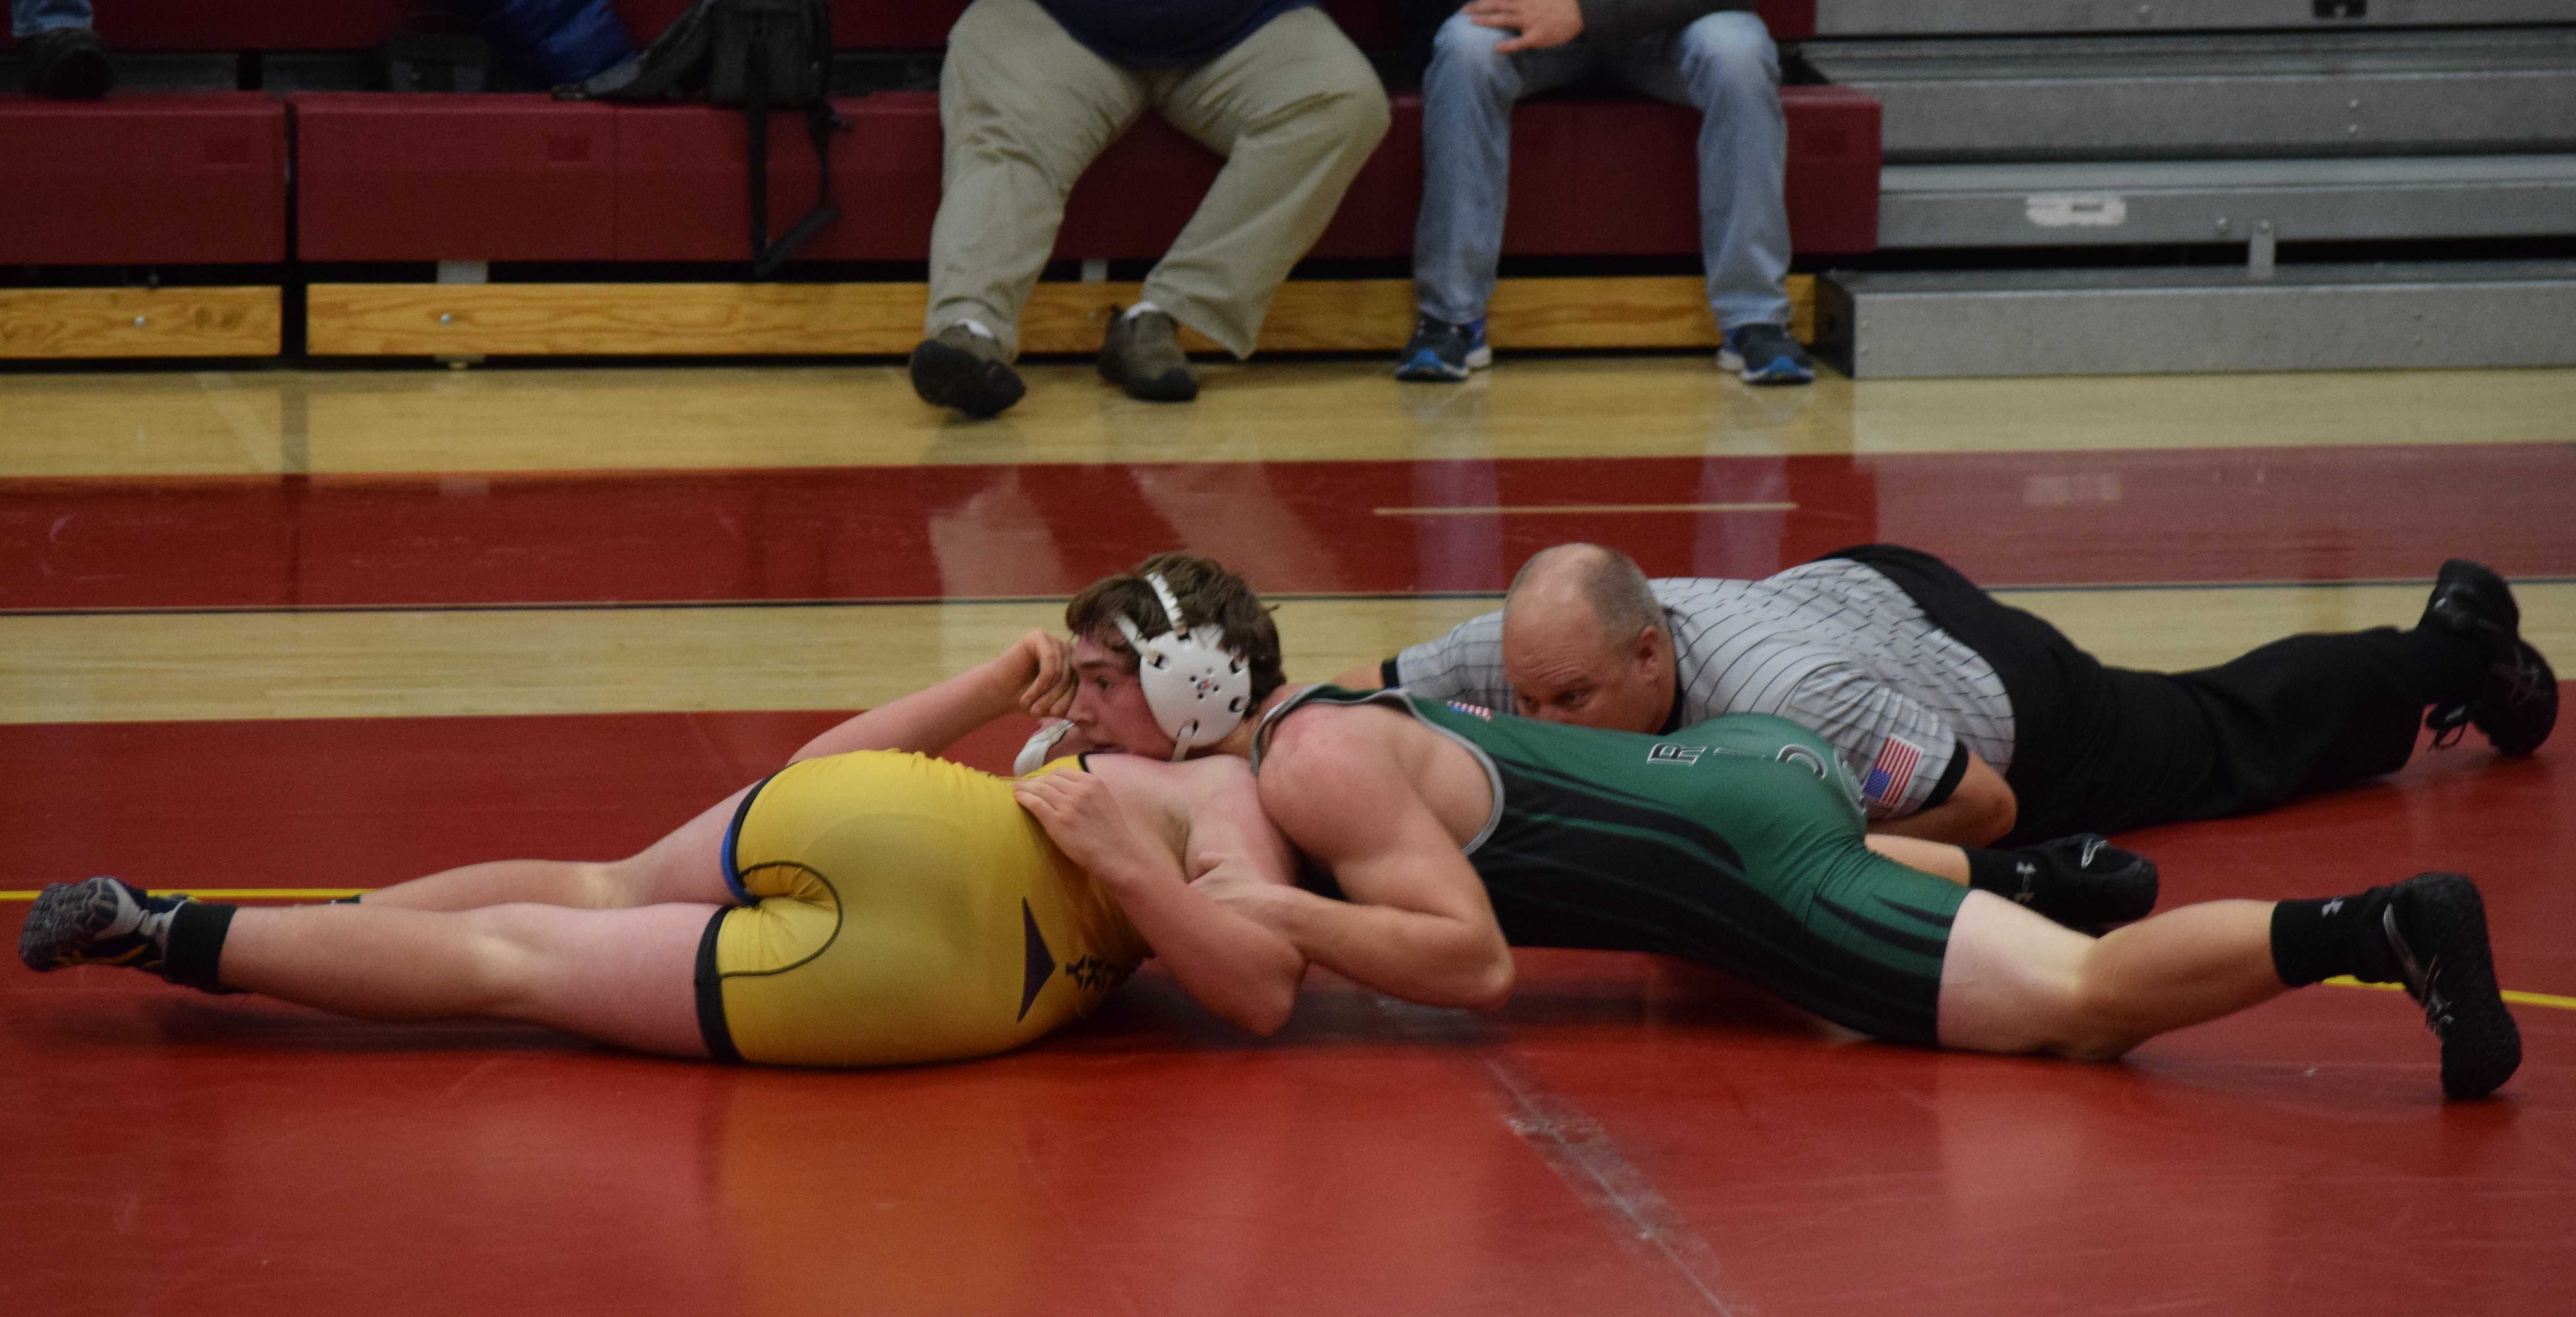 Junior, Nathan Meyer pin his opponent and scores 6 points for the team. Photo Credit: Haley Rockwell